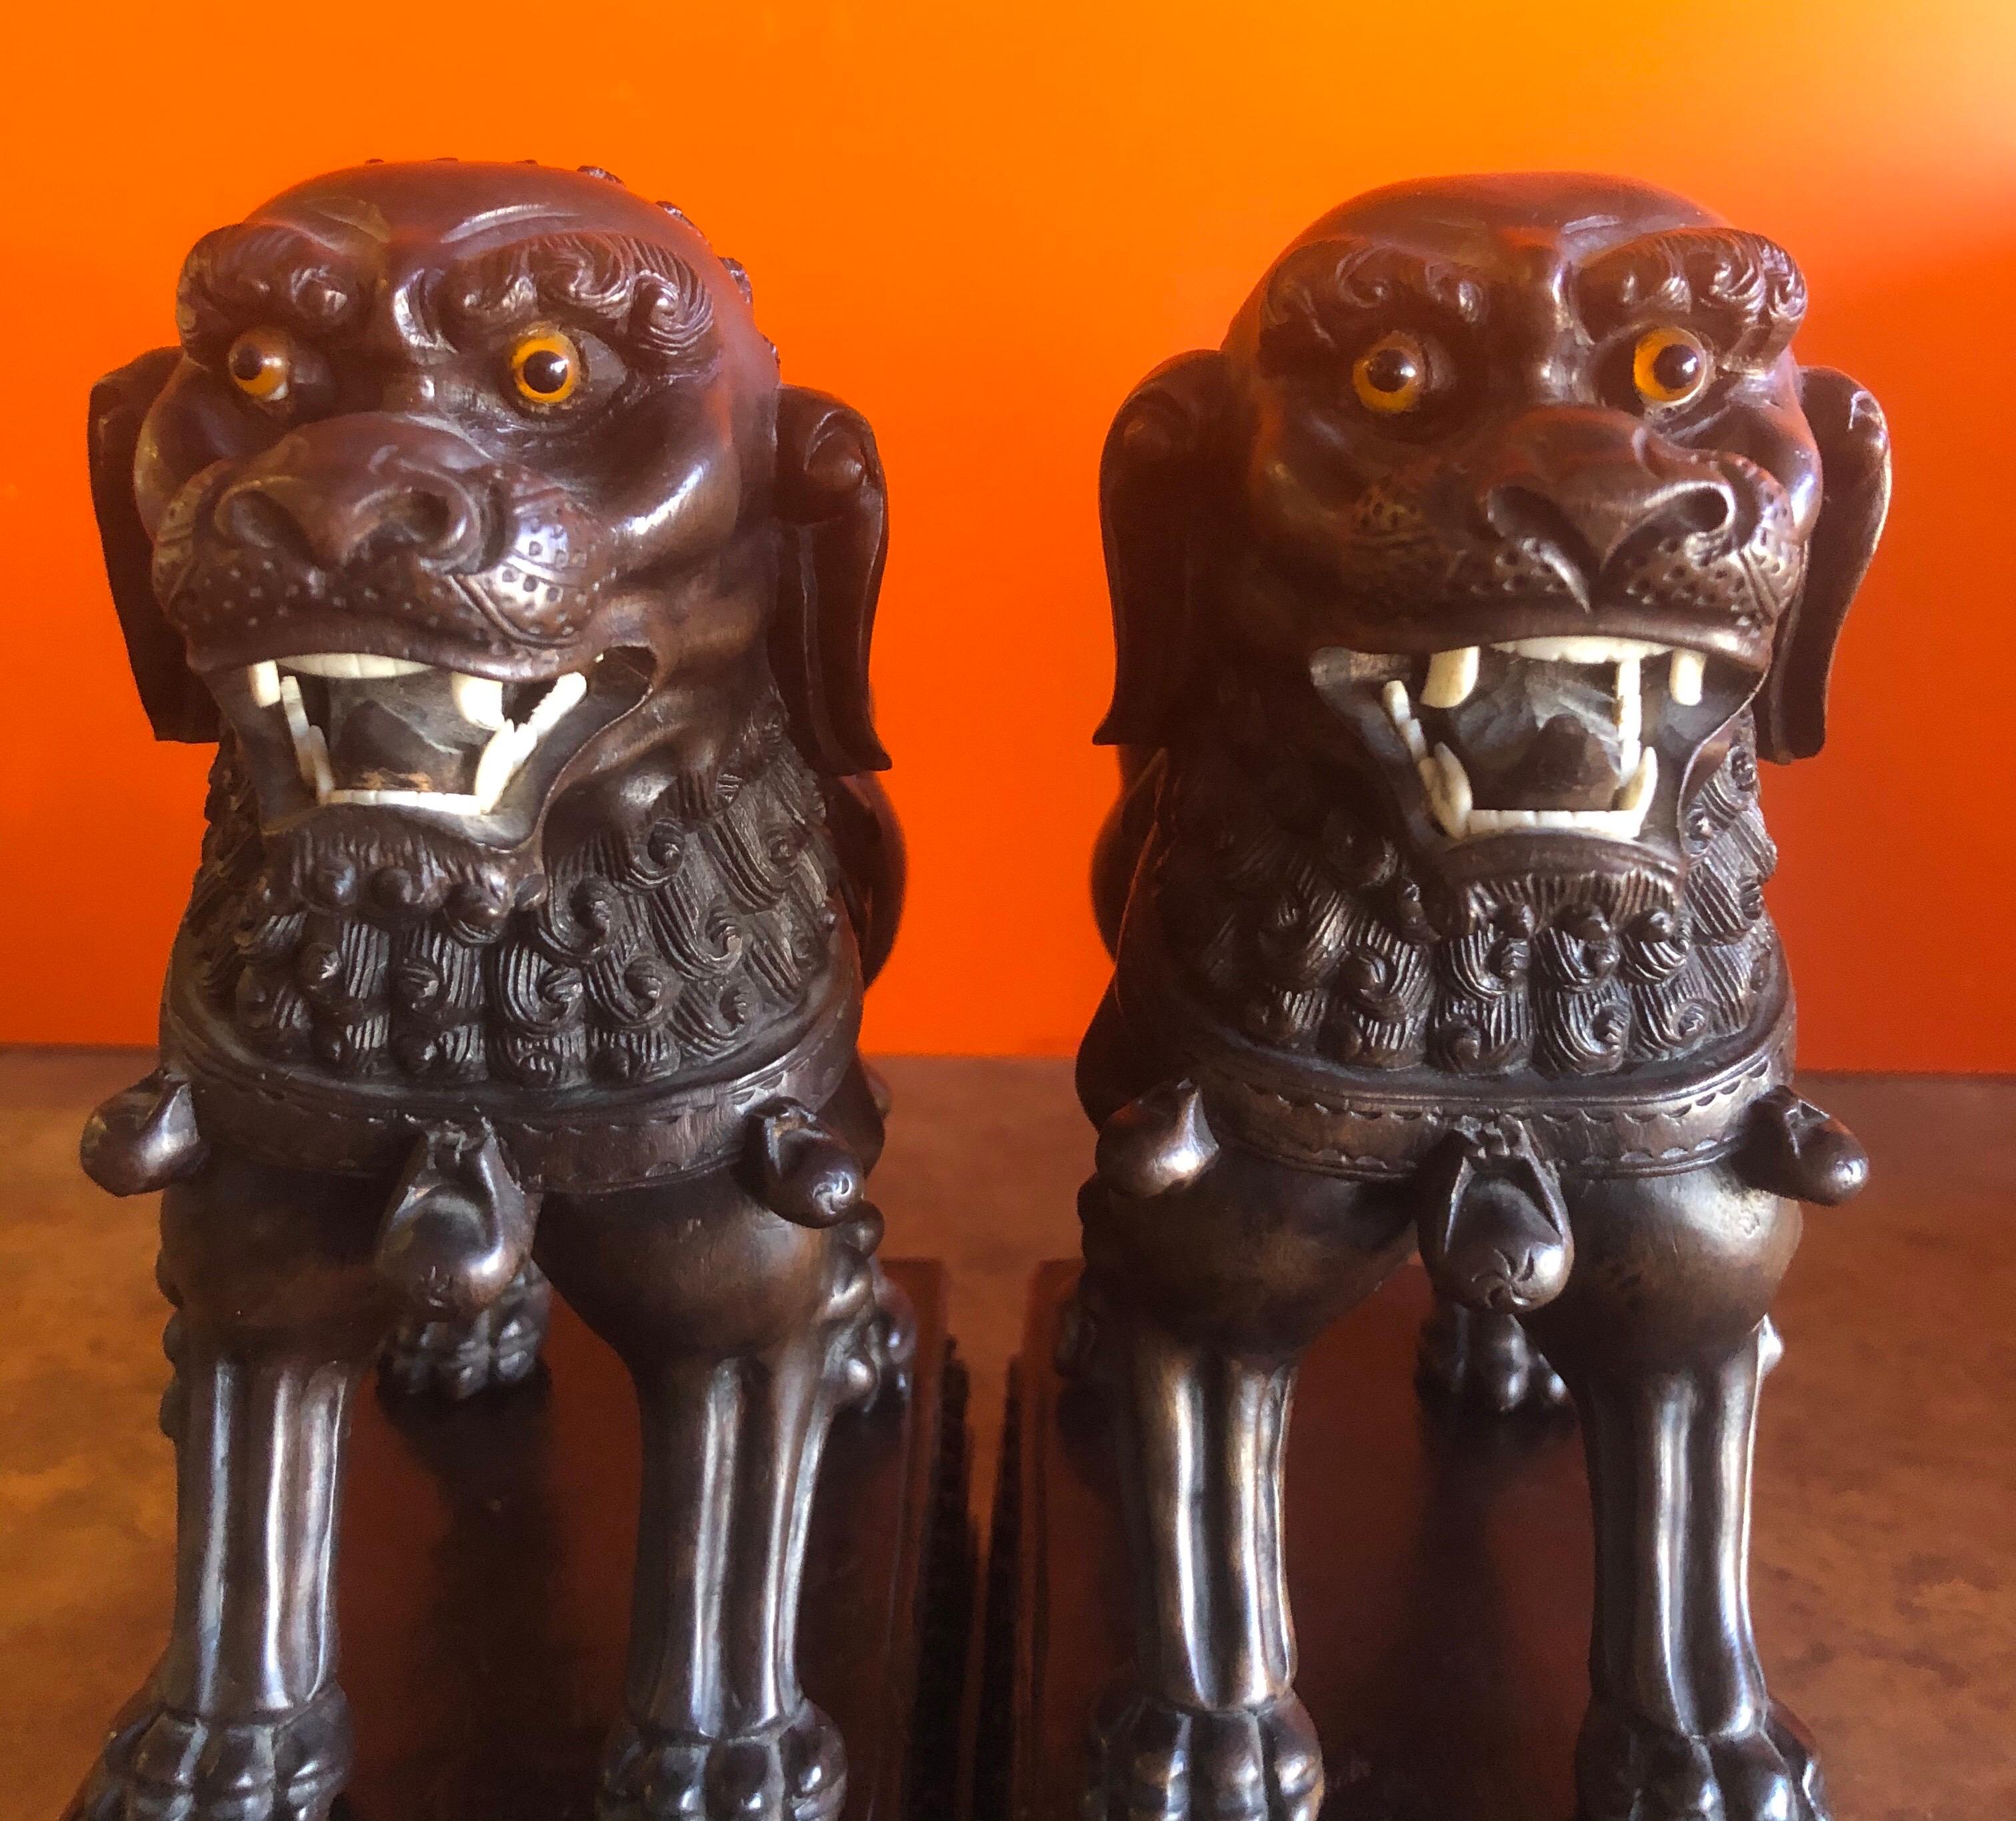 A very nice pair of vintage Chinese hand carved hard wood foo dogs or bookends which I believe are made from elm, rosewood or another type of hardwood, circa 1950s. The dogs have glass eyes and bone teeth (I believe) and are removable from their